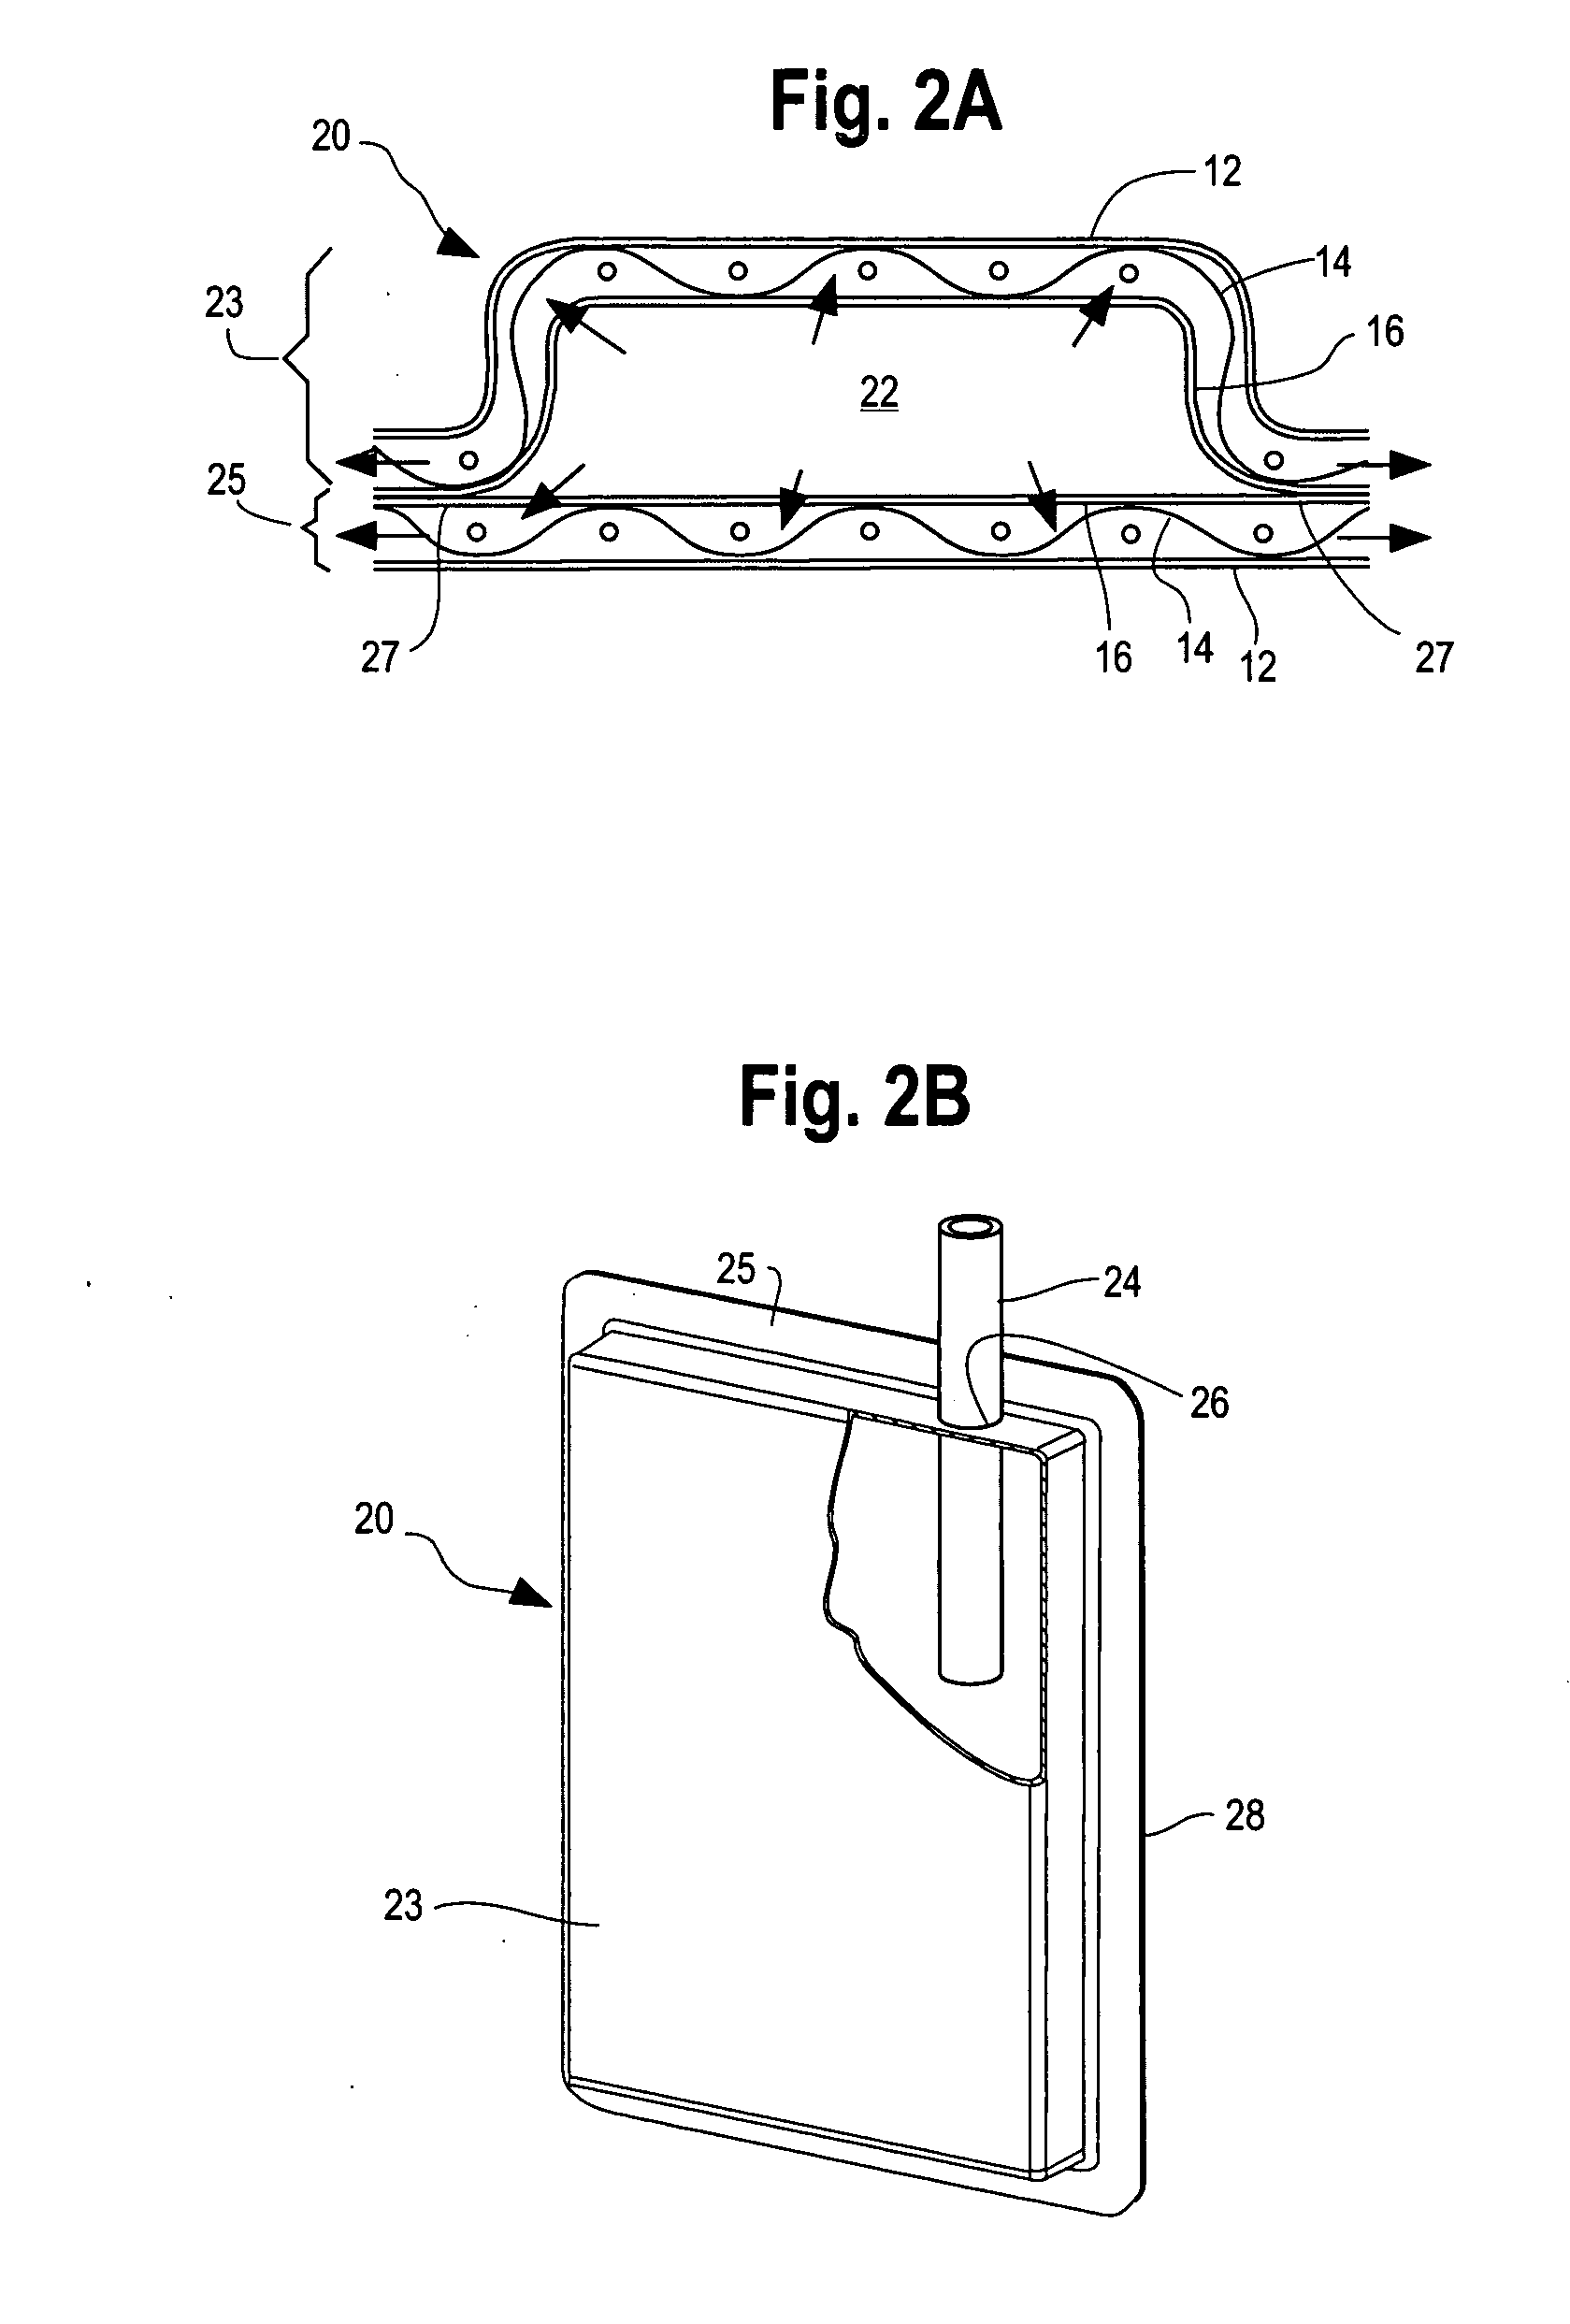 Fuel cartridge with a flexible bladder for storing and delivering a vaporizable liquid fuel stream to a fuel cell system